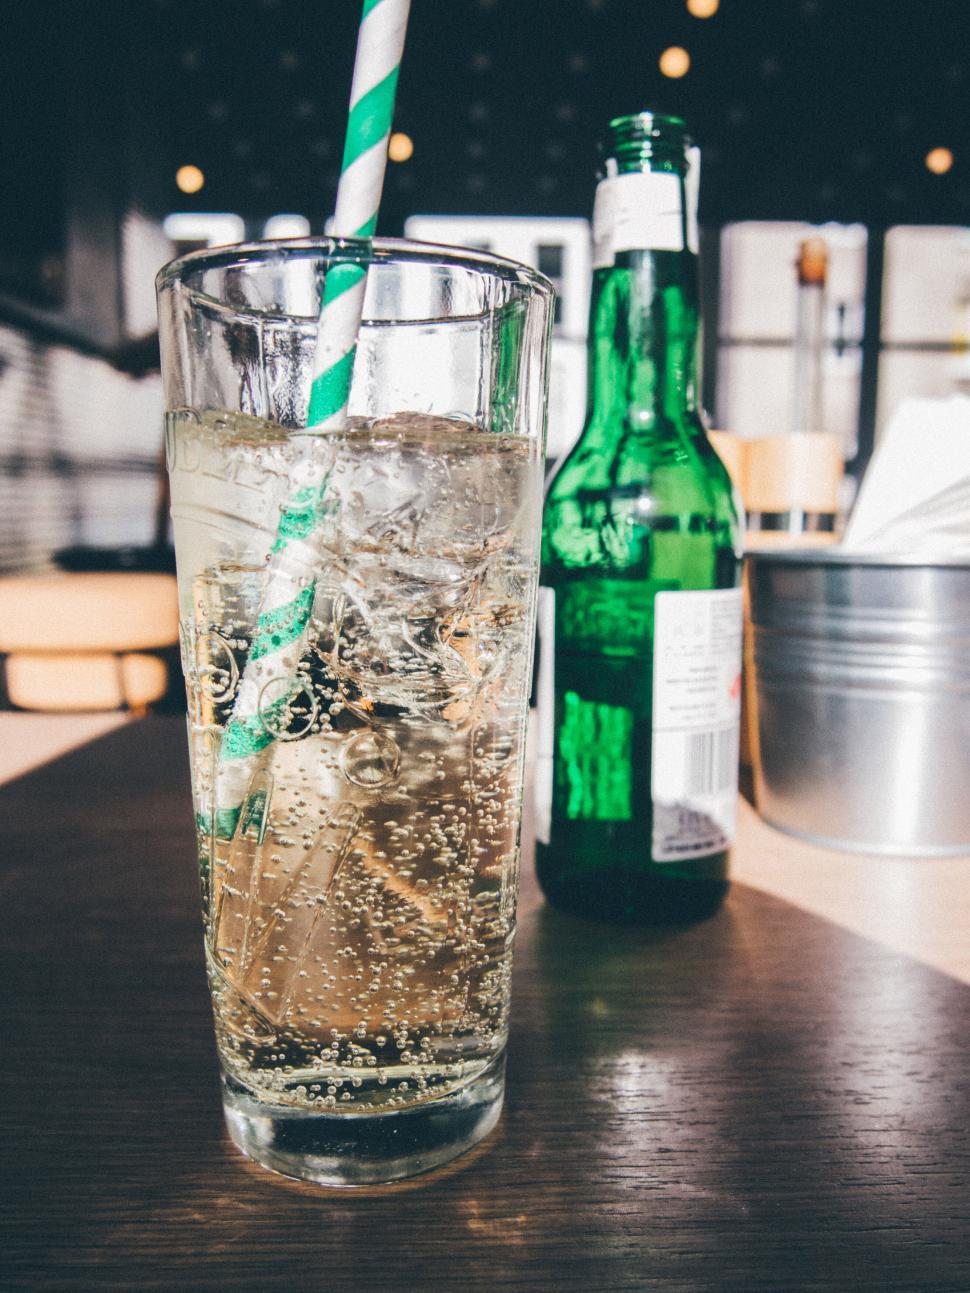 Free Image of A glass of liquid with a straw and a green bottle 